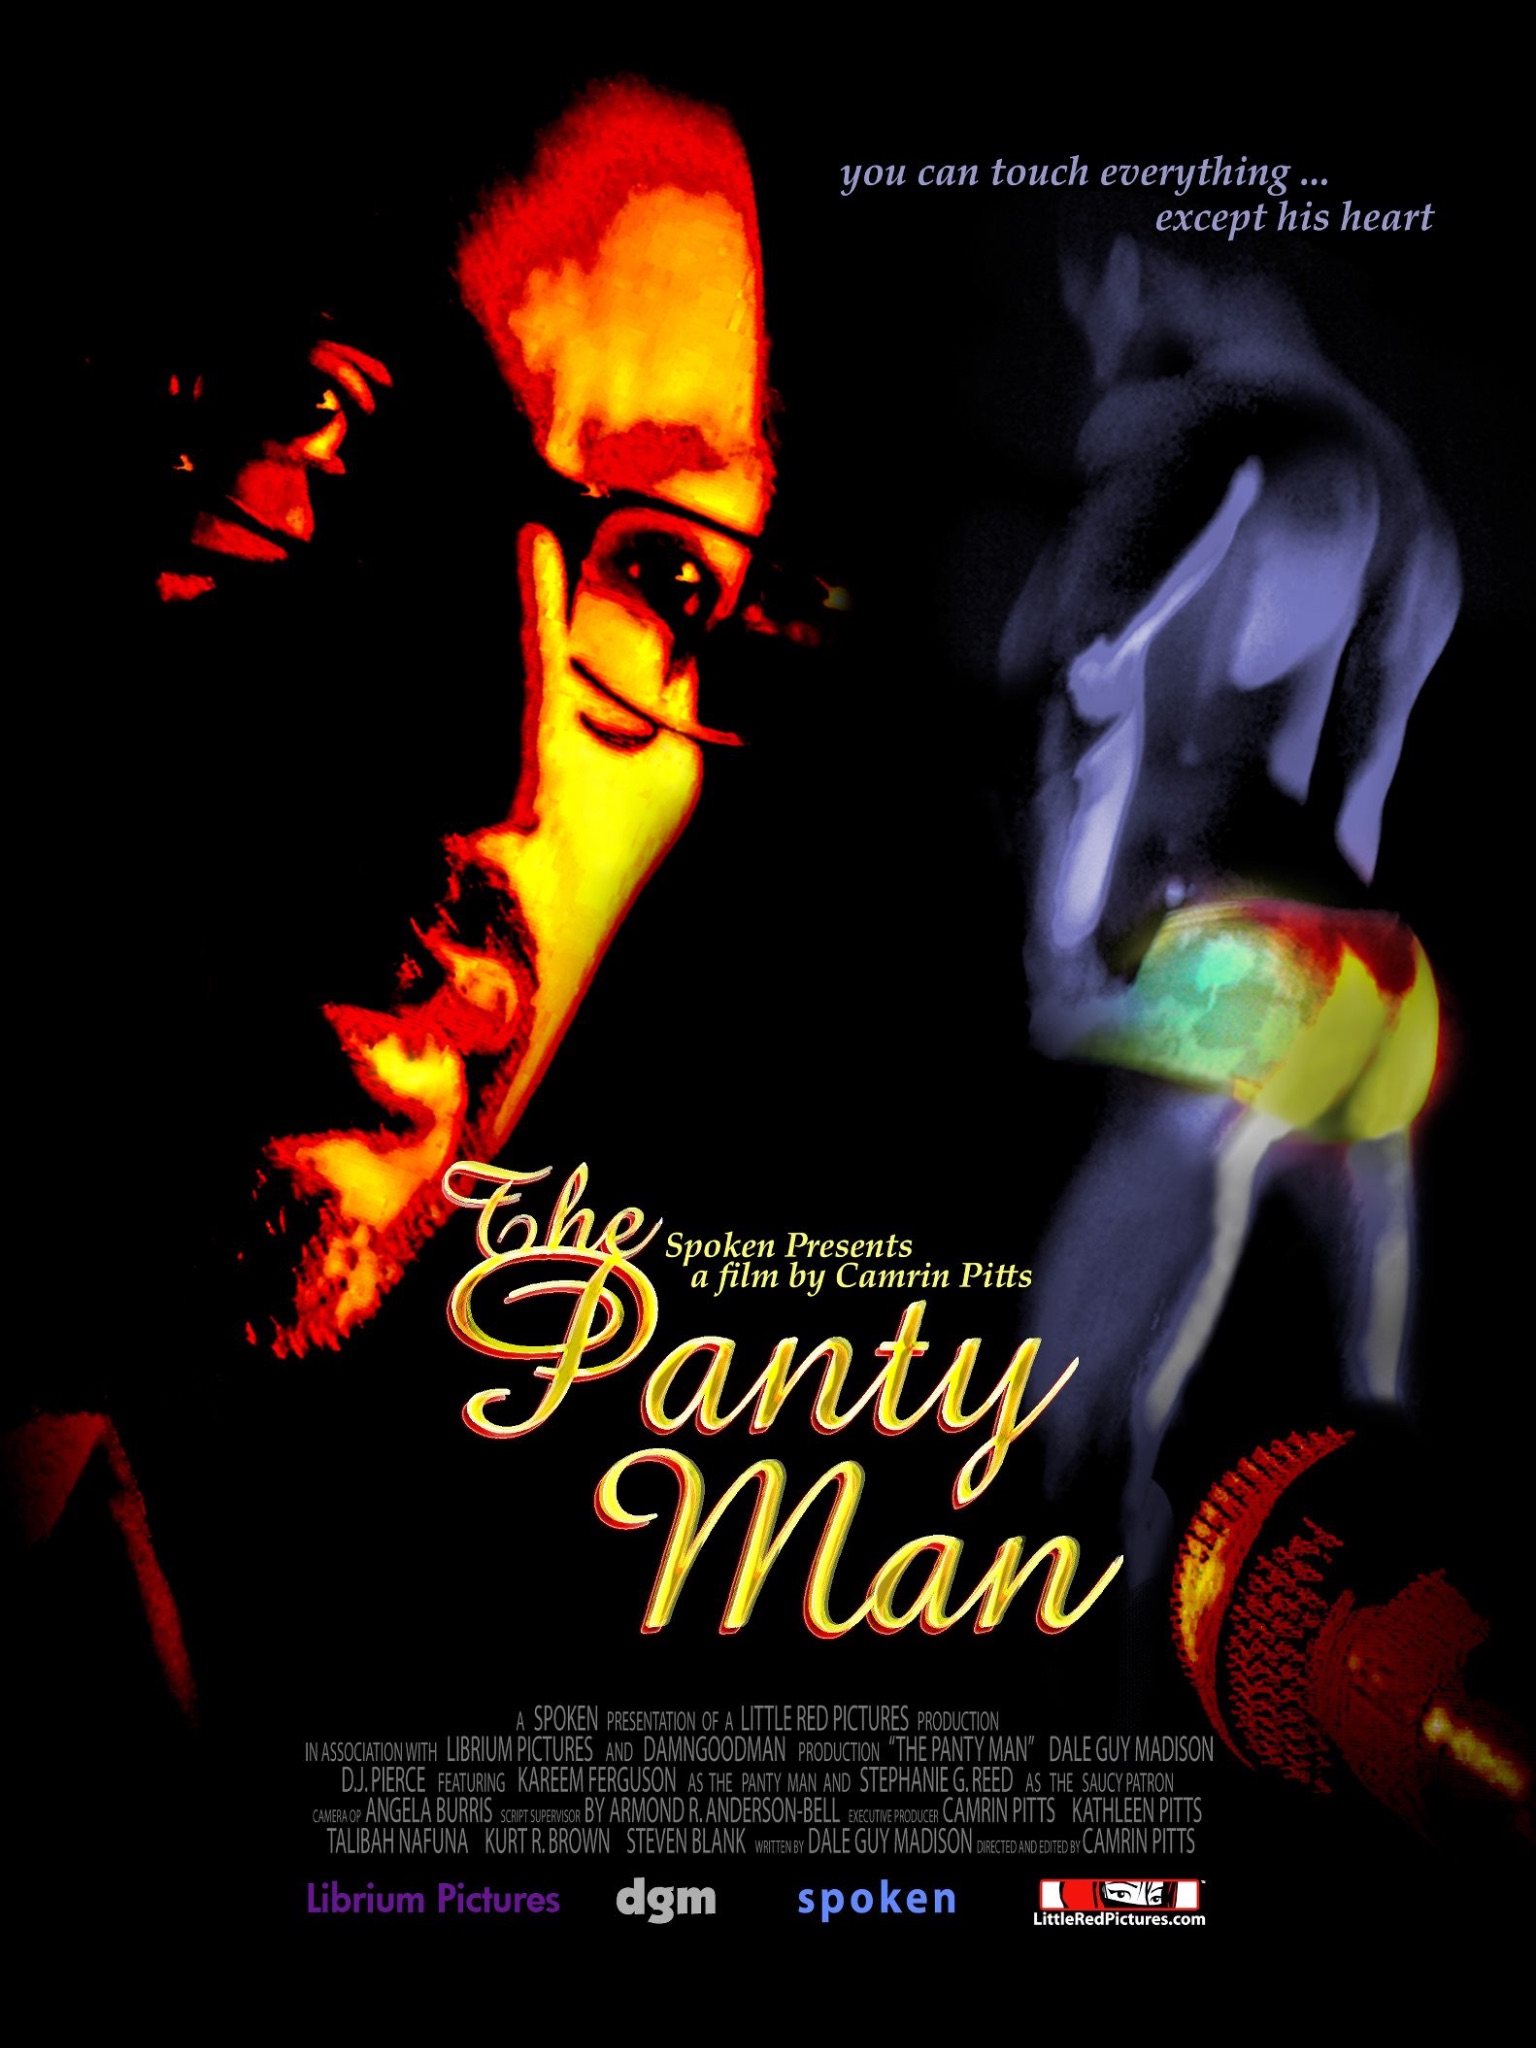 The Panty Man (poster)